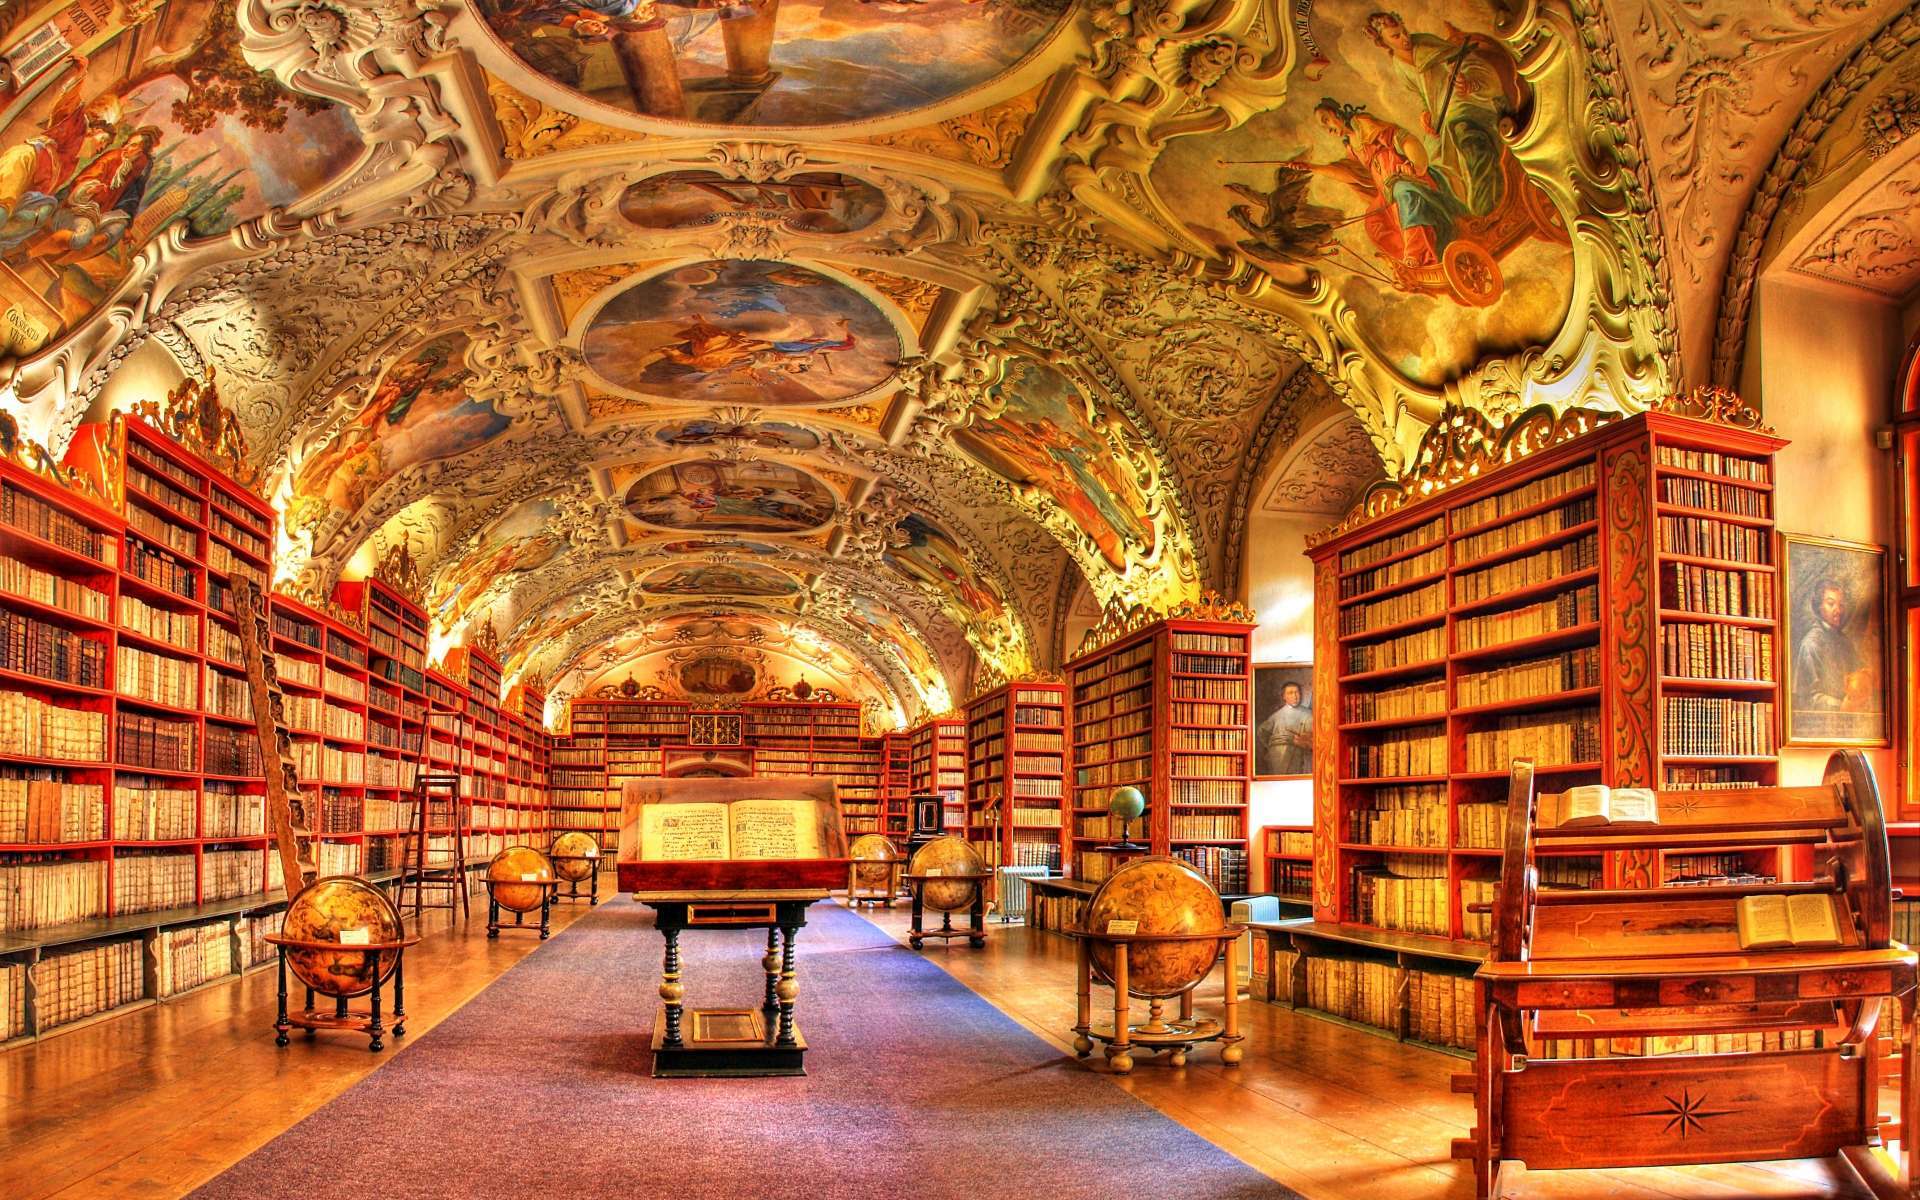 Wallpaper HDr Photography Library Books Interior Design